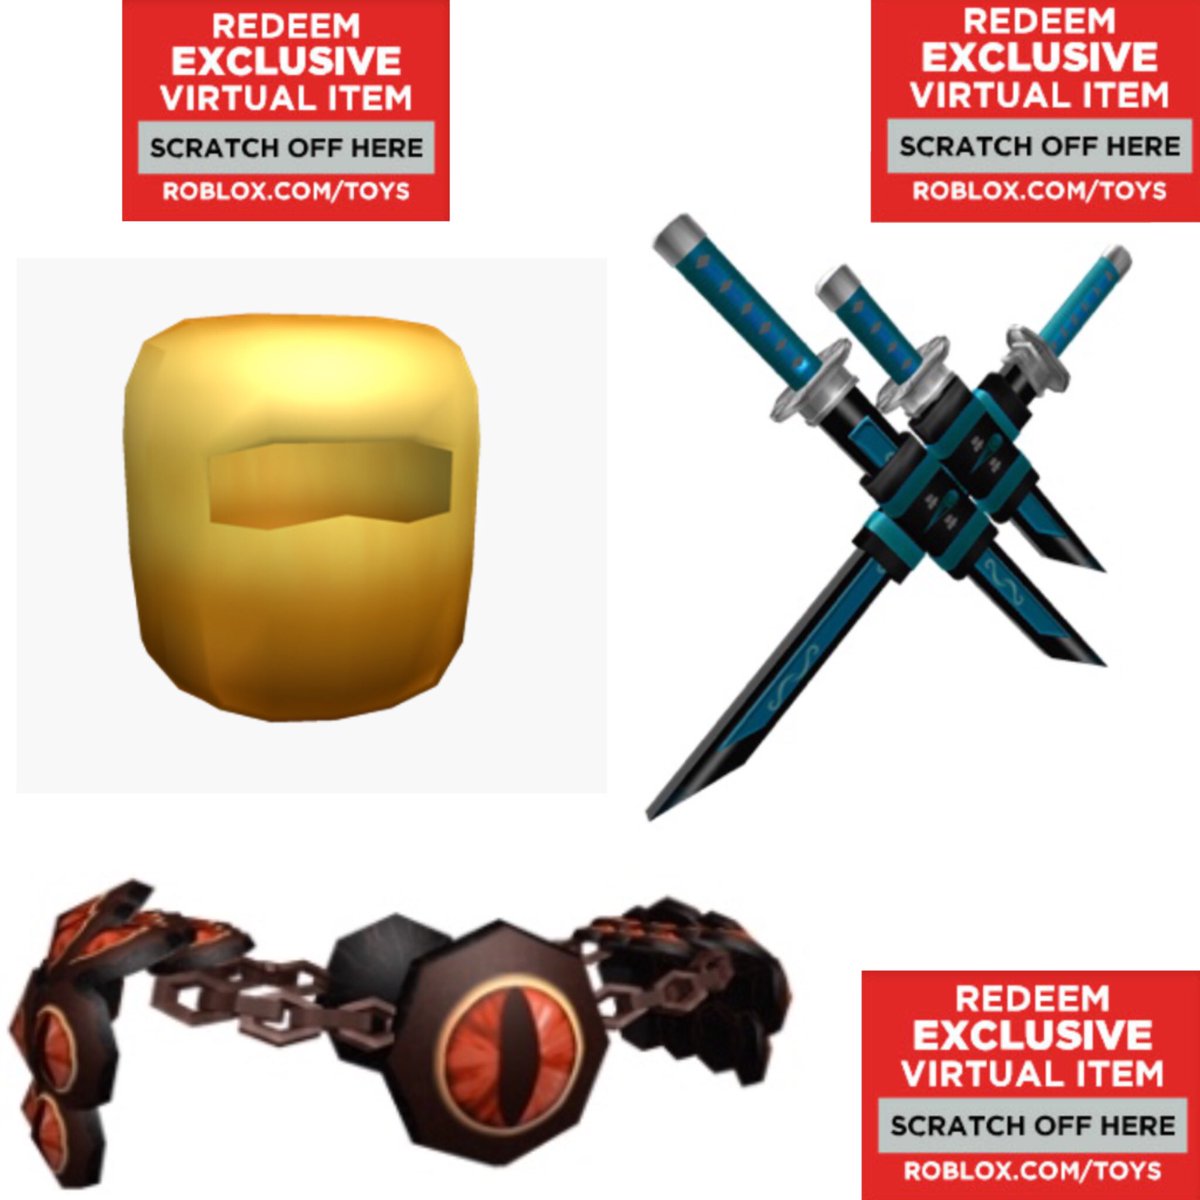 roblox toy codes 2018 september